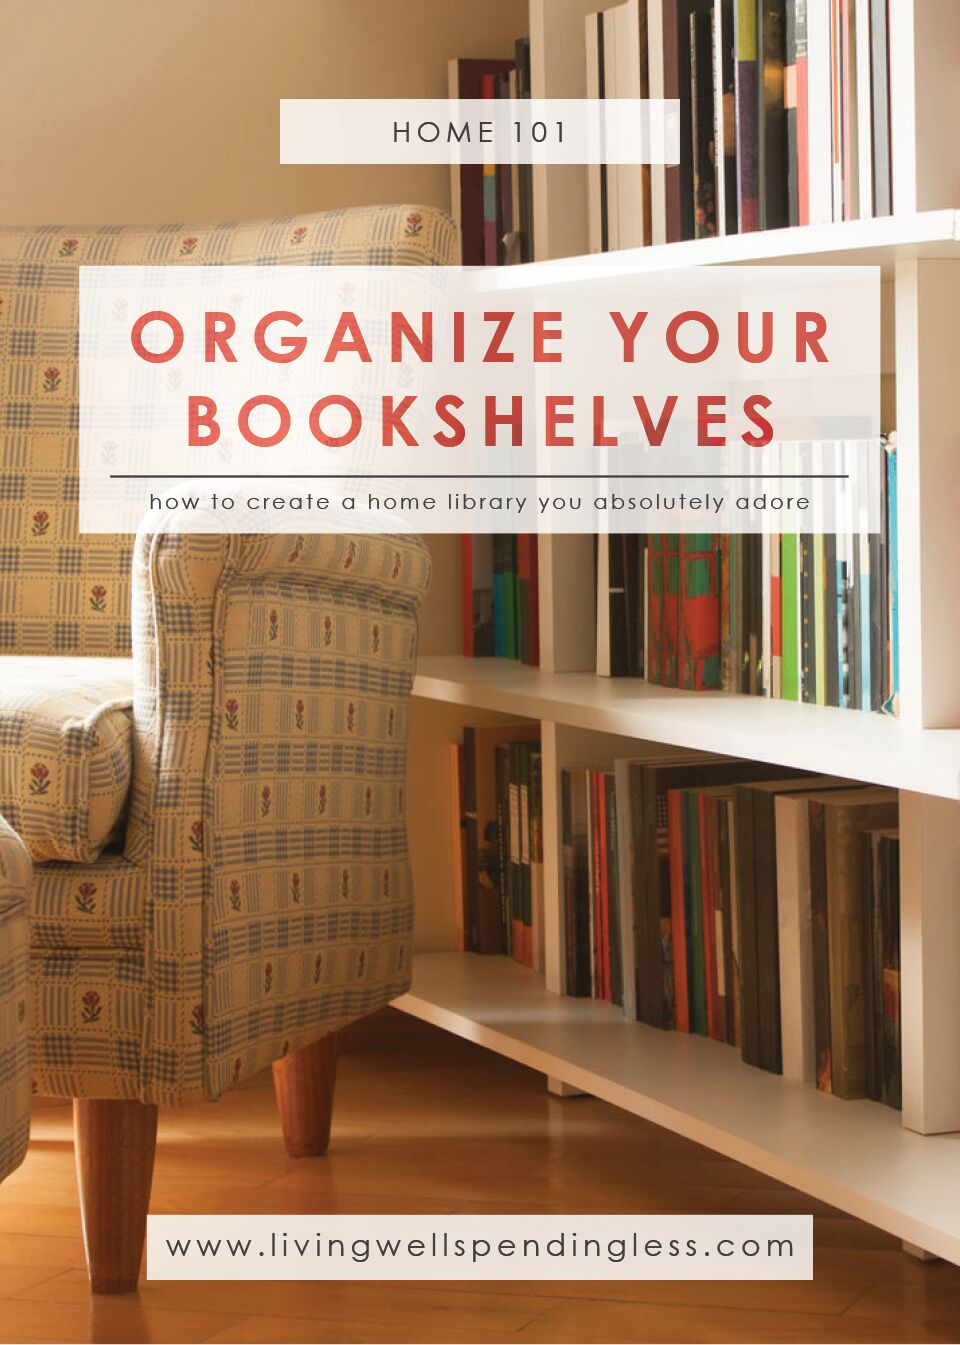 How to Organize Your Bookshelves | How to Create a Home Library | Organize Books | Declutter Your Books